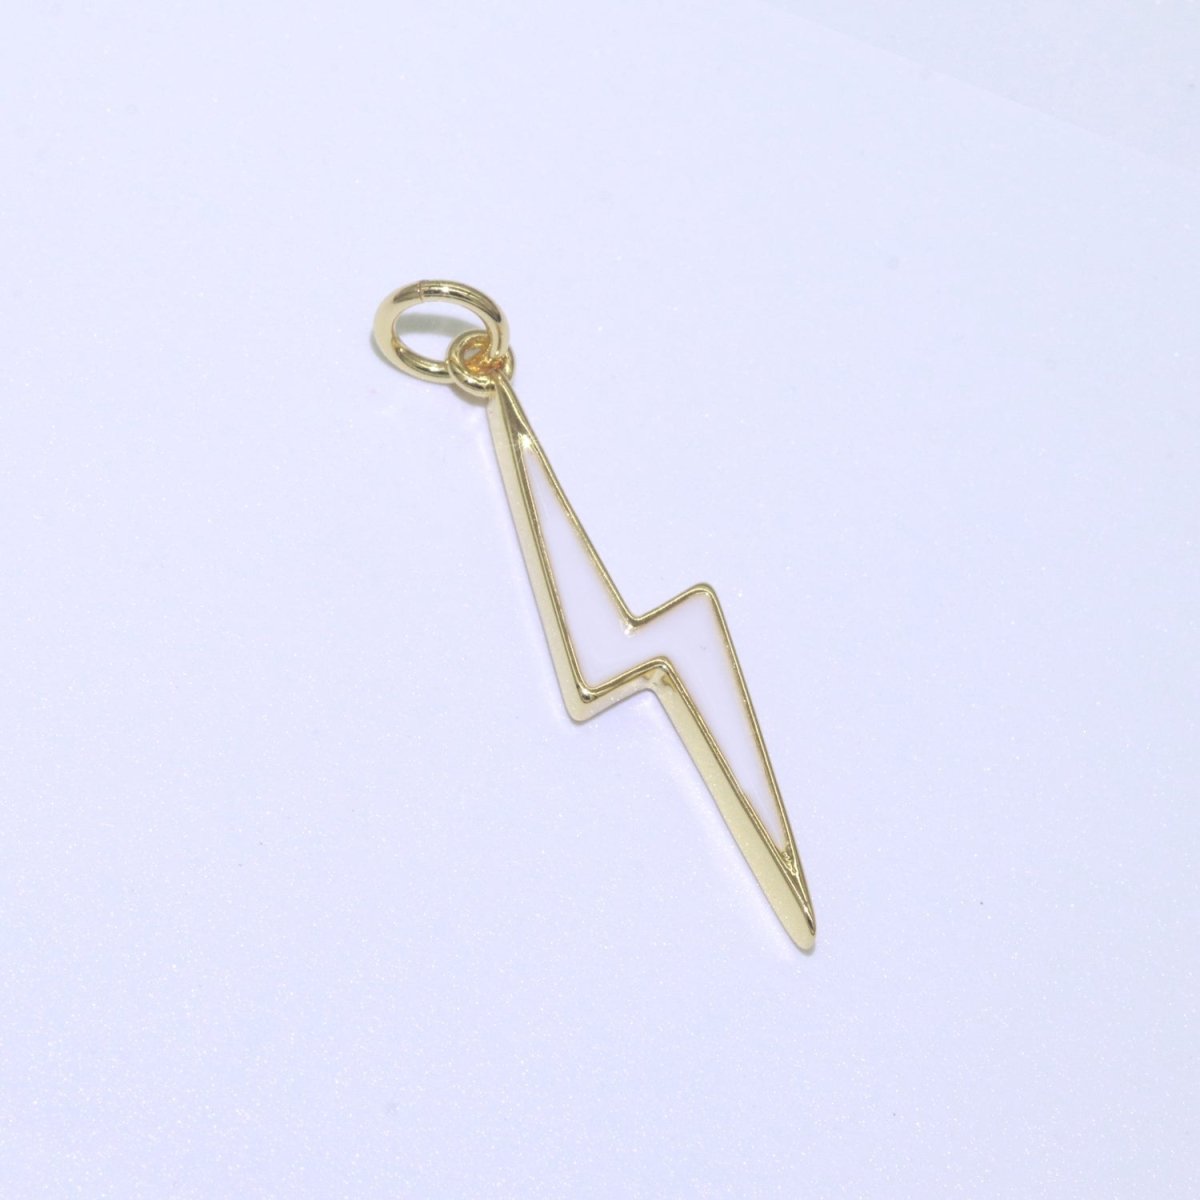 14K Gold Filled Colorful Enamel Lightning Thunder Bolt Pendant Charm For Wholesale Pendants and Charms Jewelry Making Craft Supplies M-305 to M-314 - DLUXCA